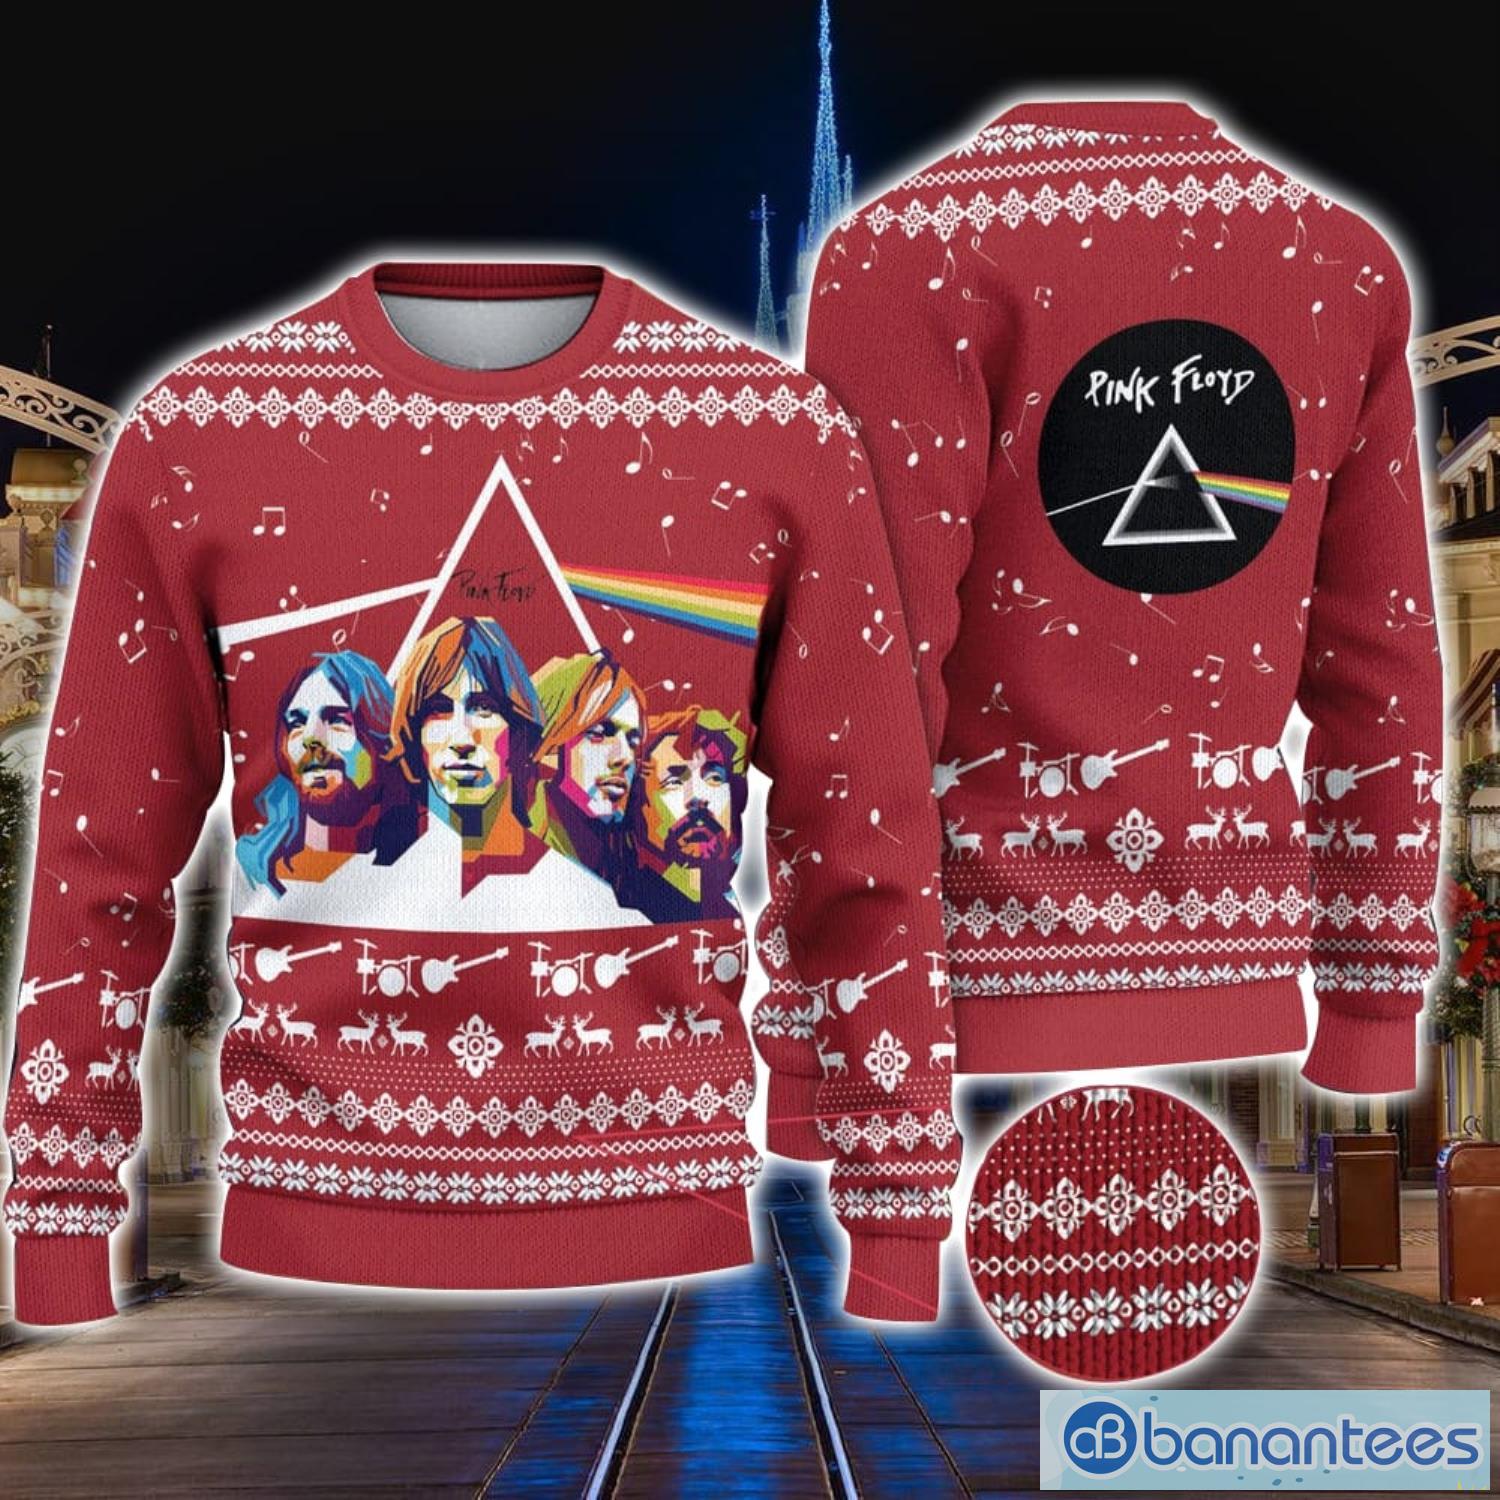 Pink Floyd Band 3D Ugly Christmas Sweater - Jolly Family Gifts